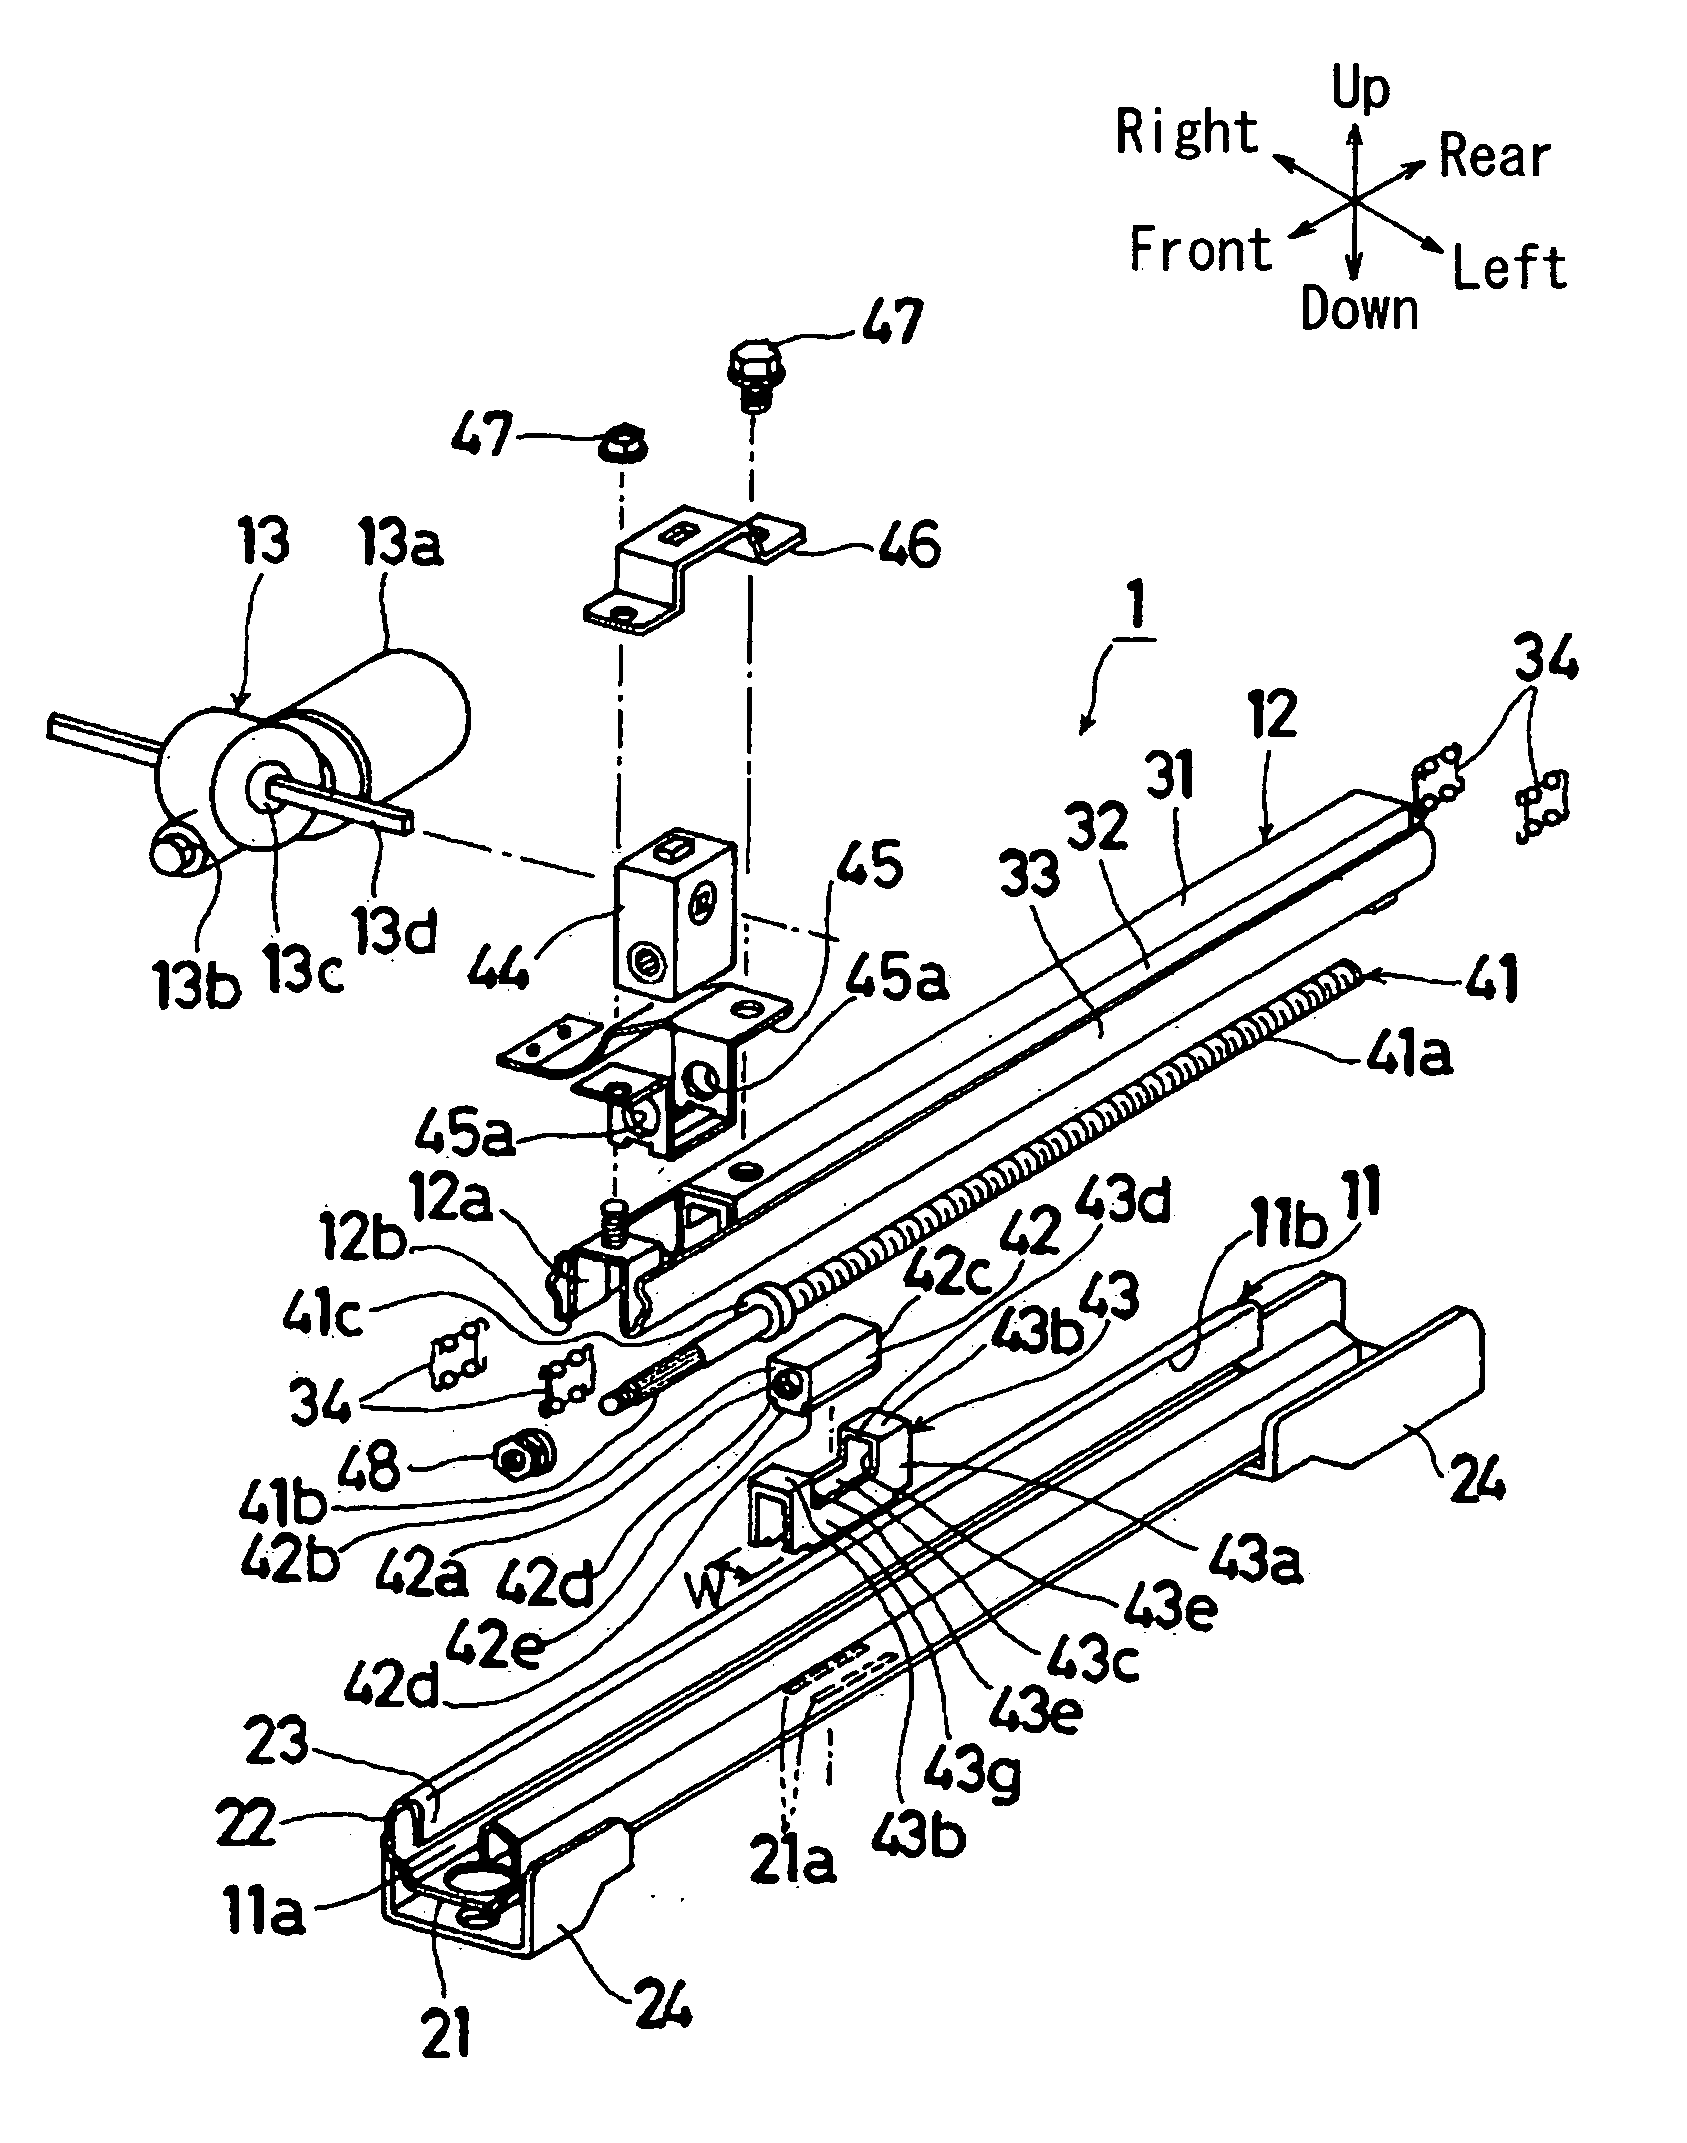 Power seat slide apparatus for a vehicle